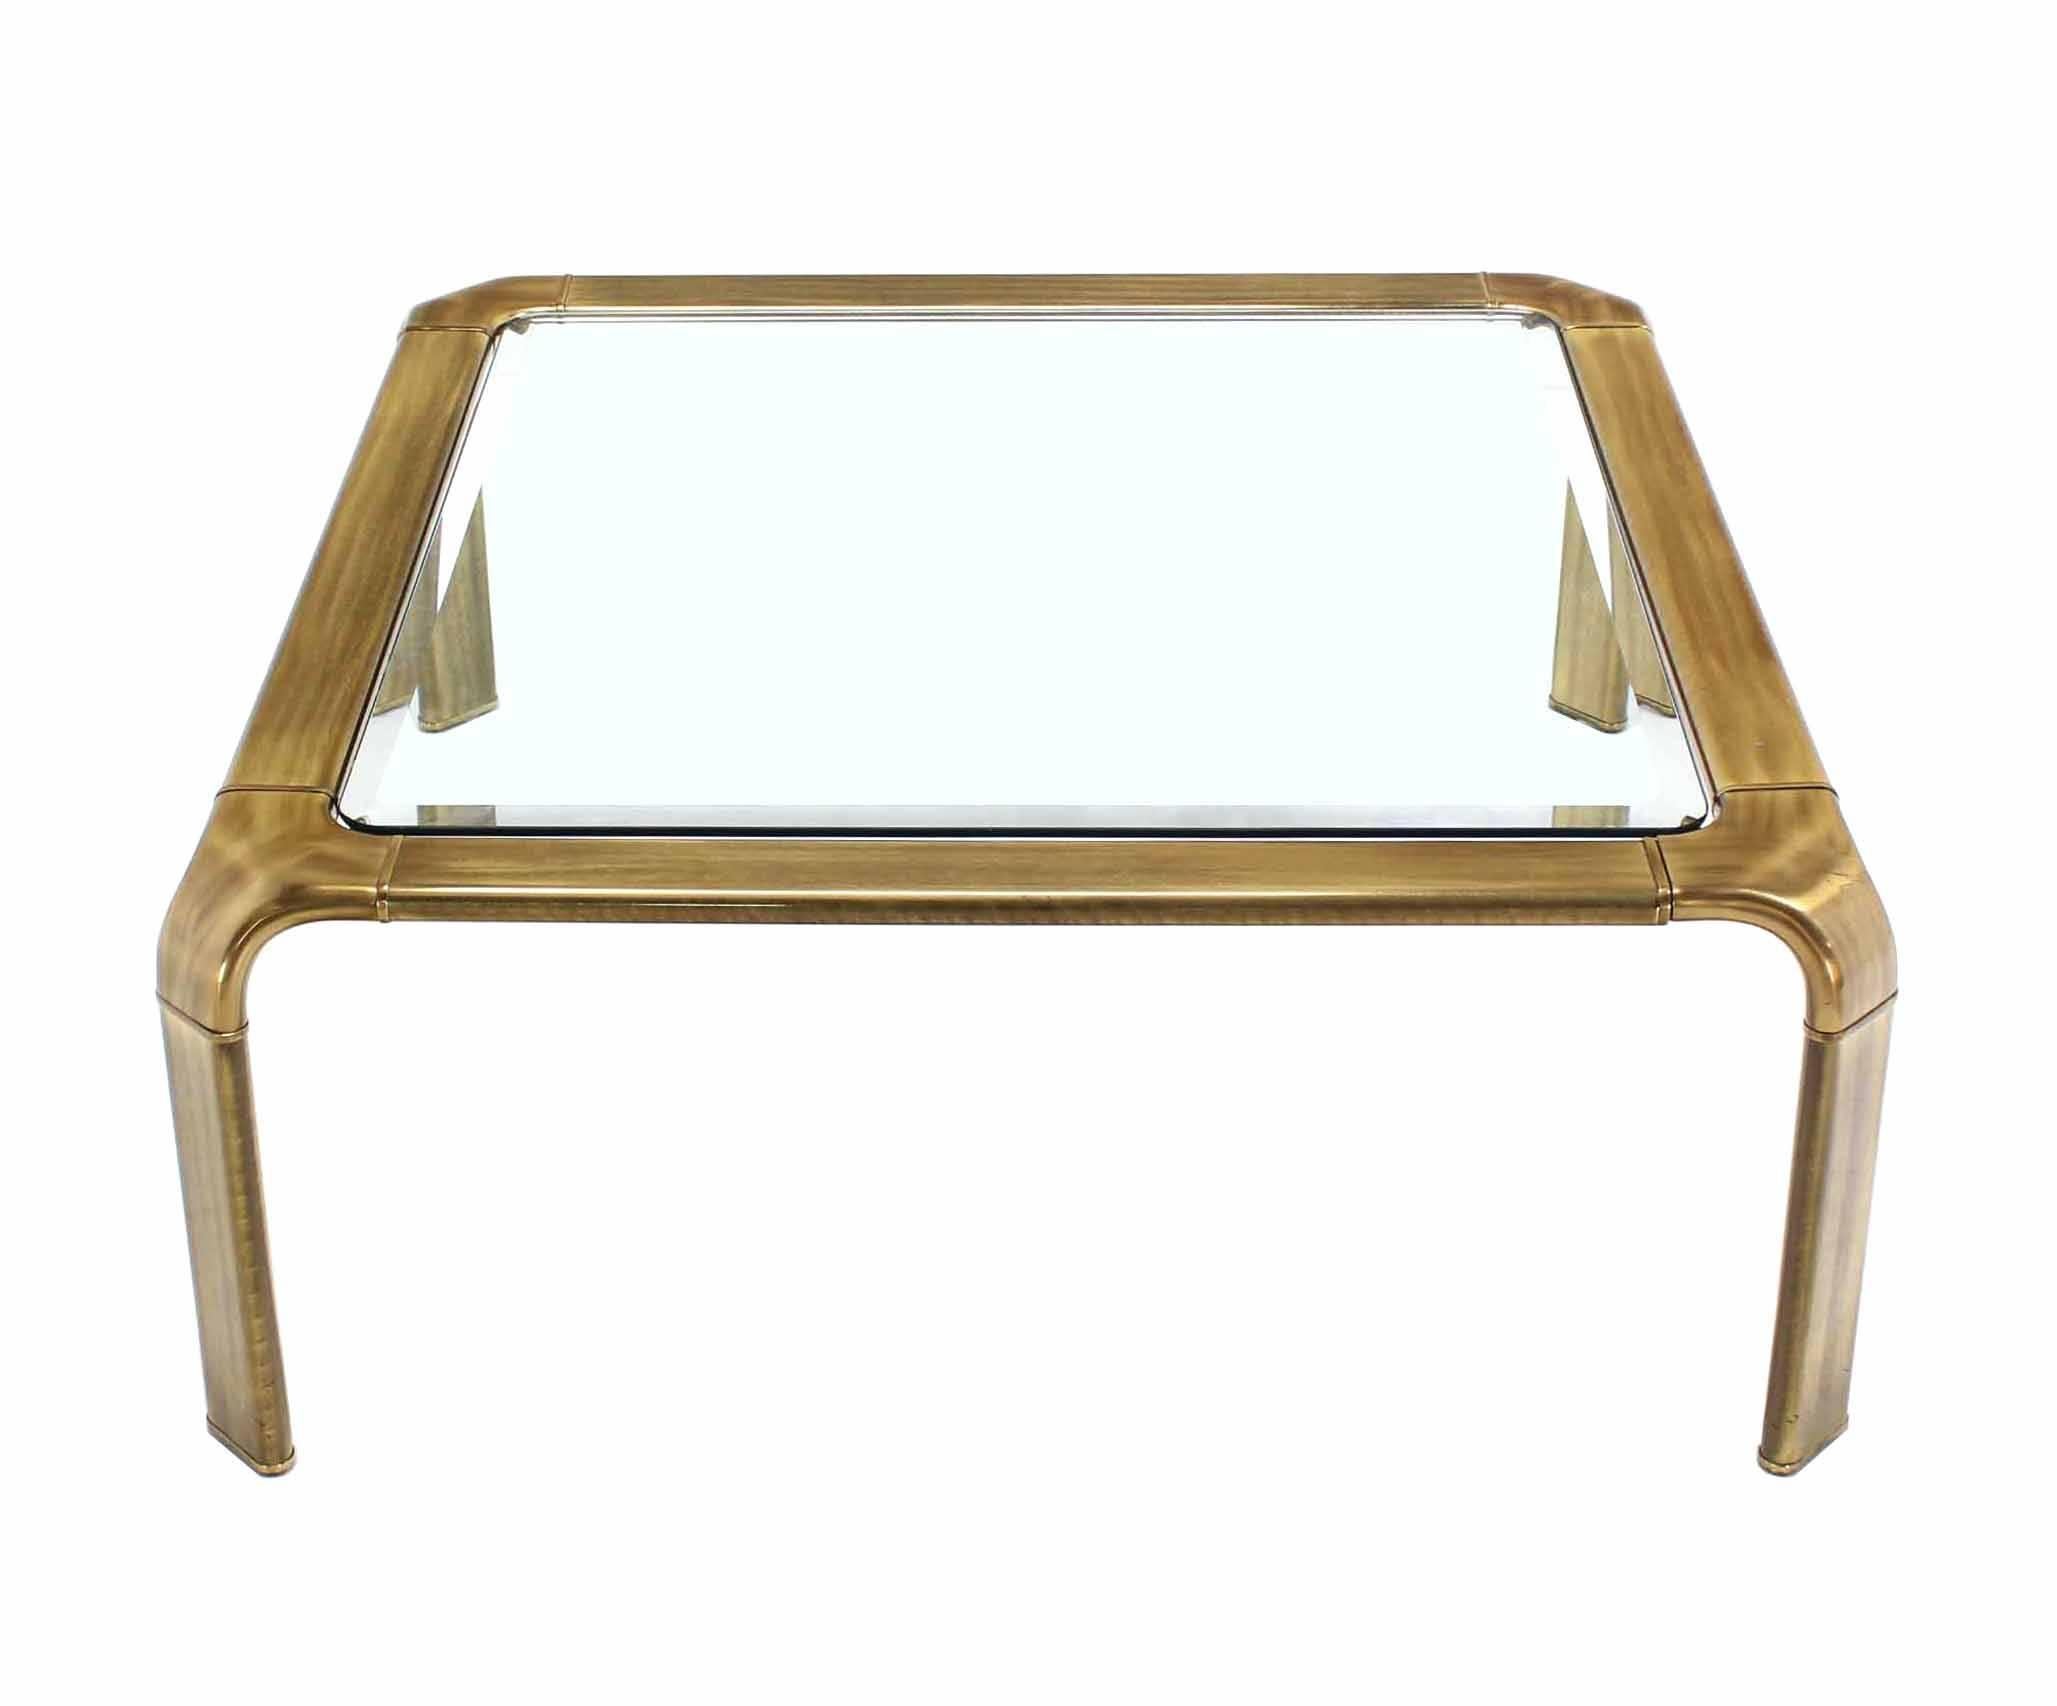 Mid Century modern square coffee table by Widdicomb.